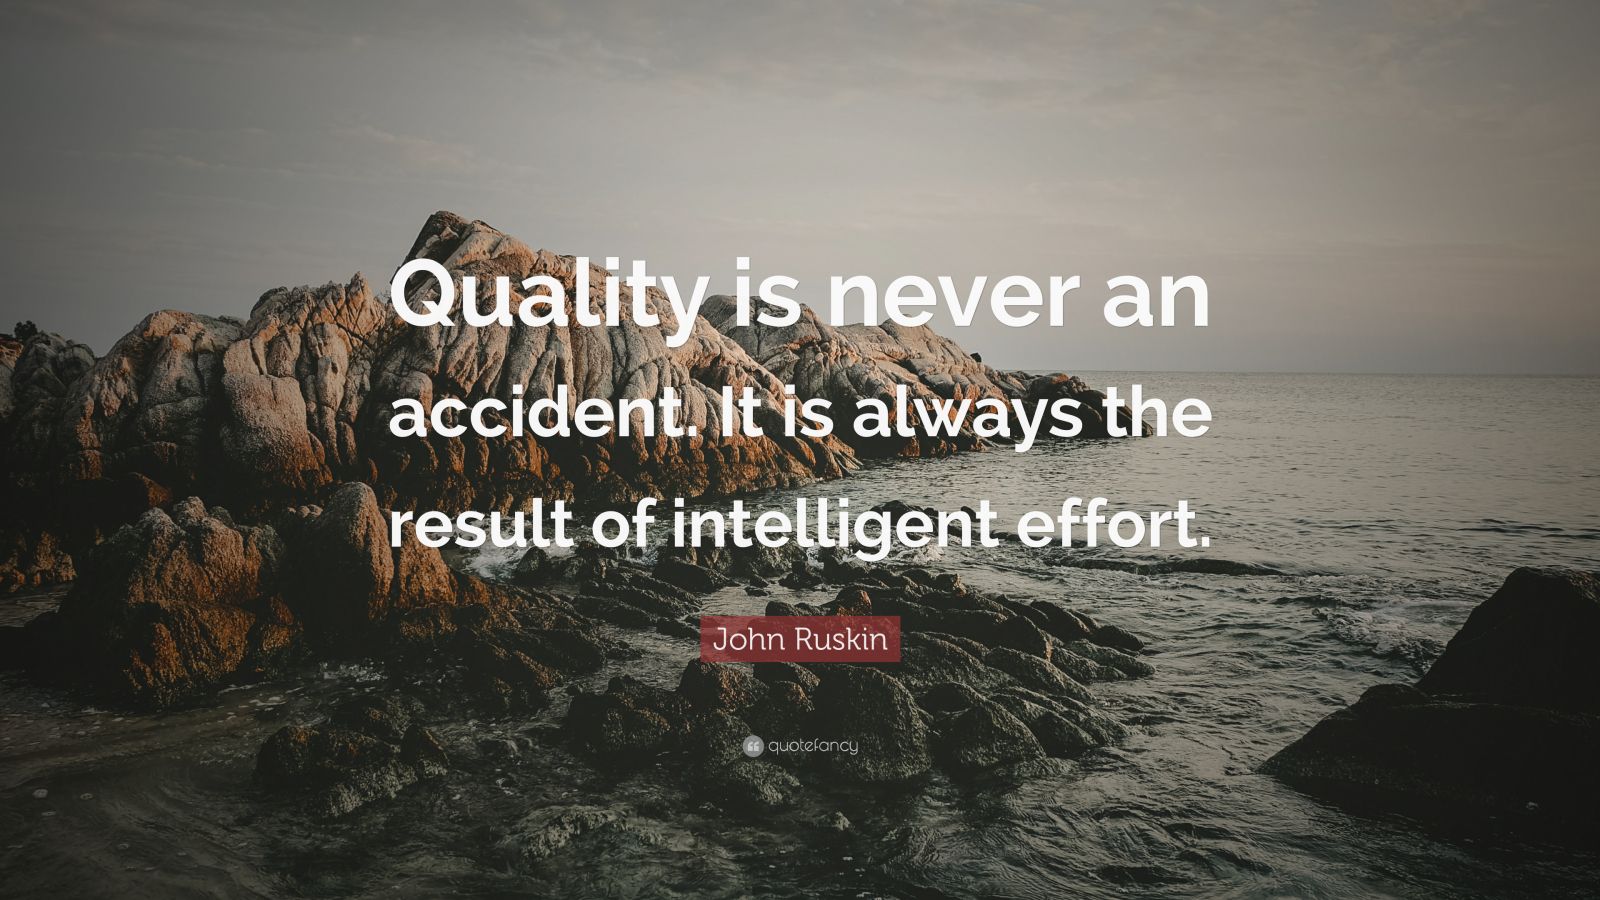 John Ruskin Quote: “Quality is never an accident. It is always the ...